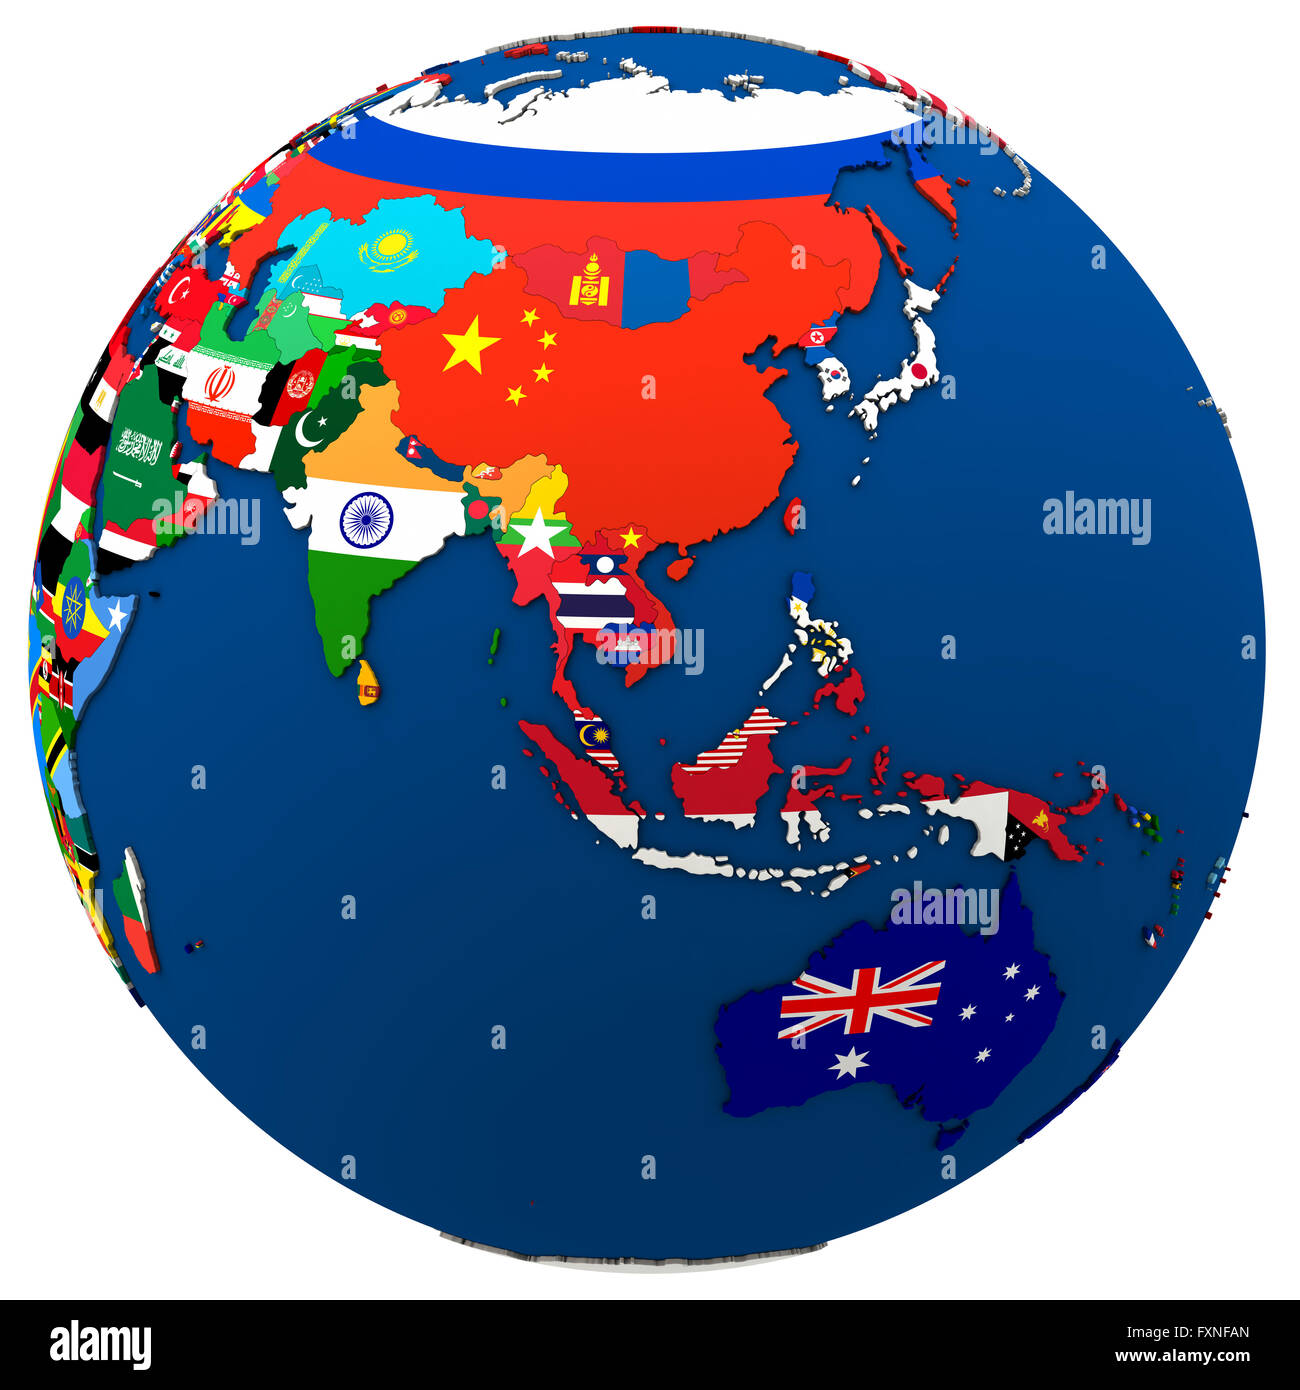 Political Map Of Southeast Asia And Australia With Each Country Represented By Its National Flag. 3D Illustration Isolated On Wh Stock Photo - Alamy